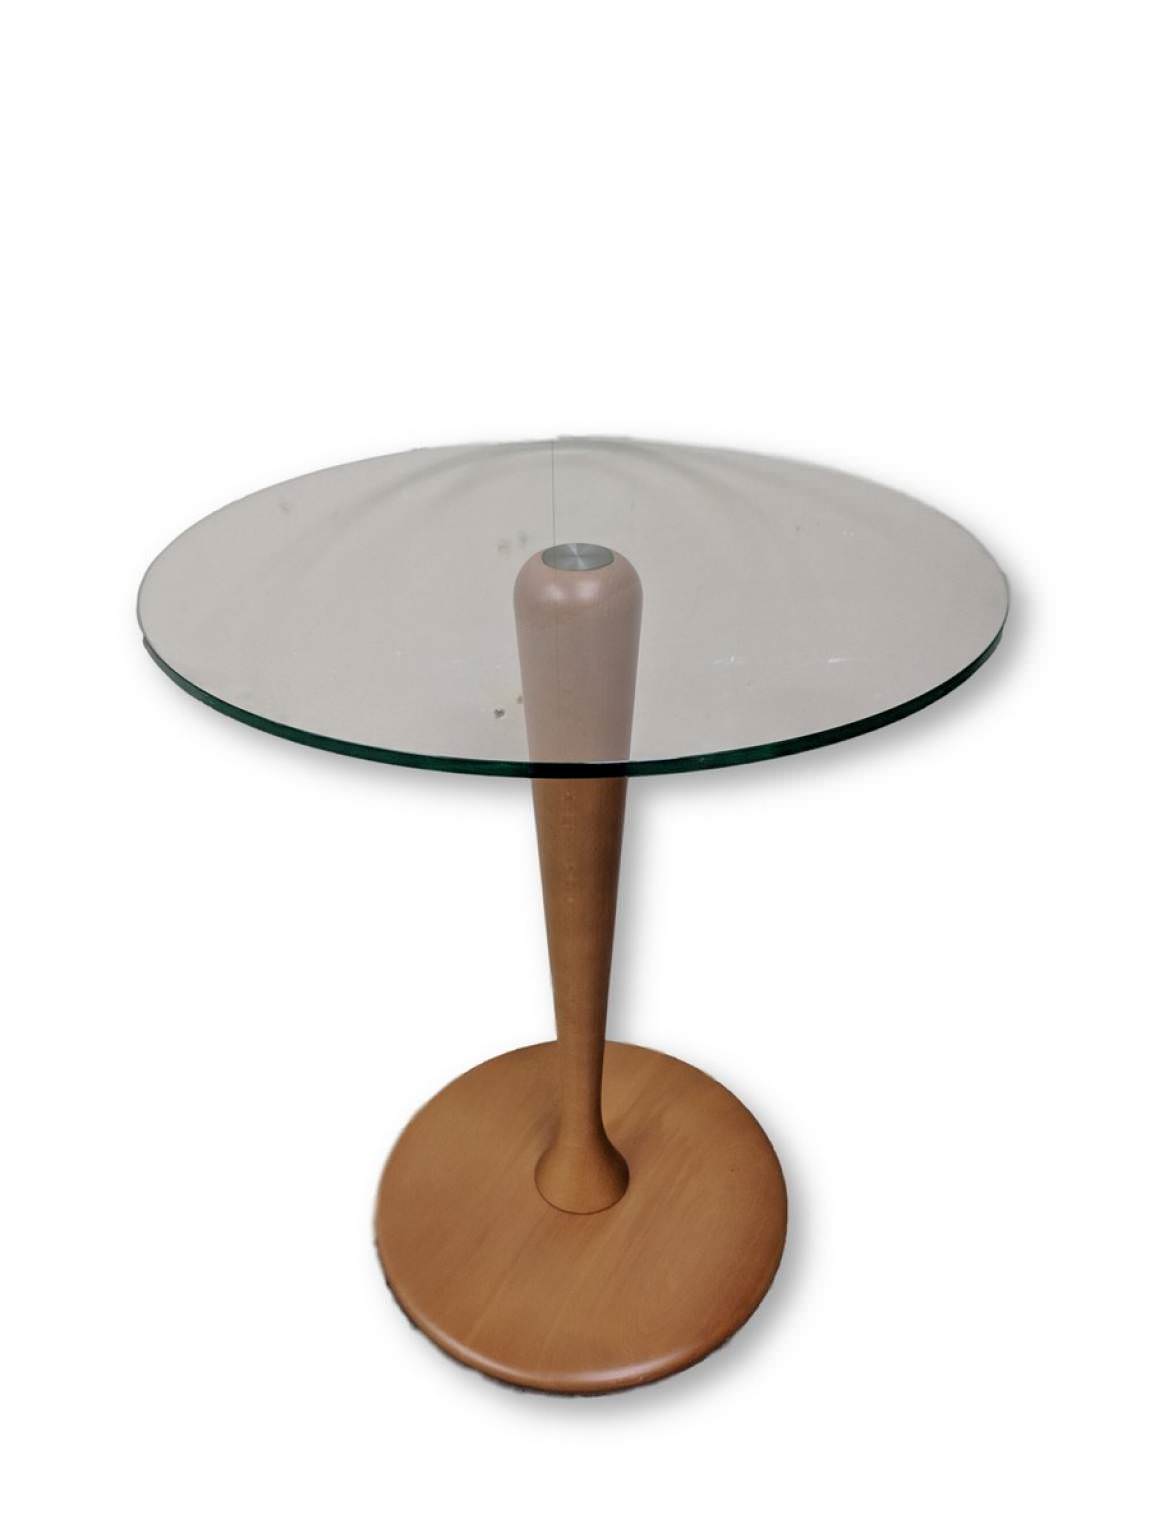 18” Round Glass Top Table